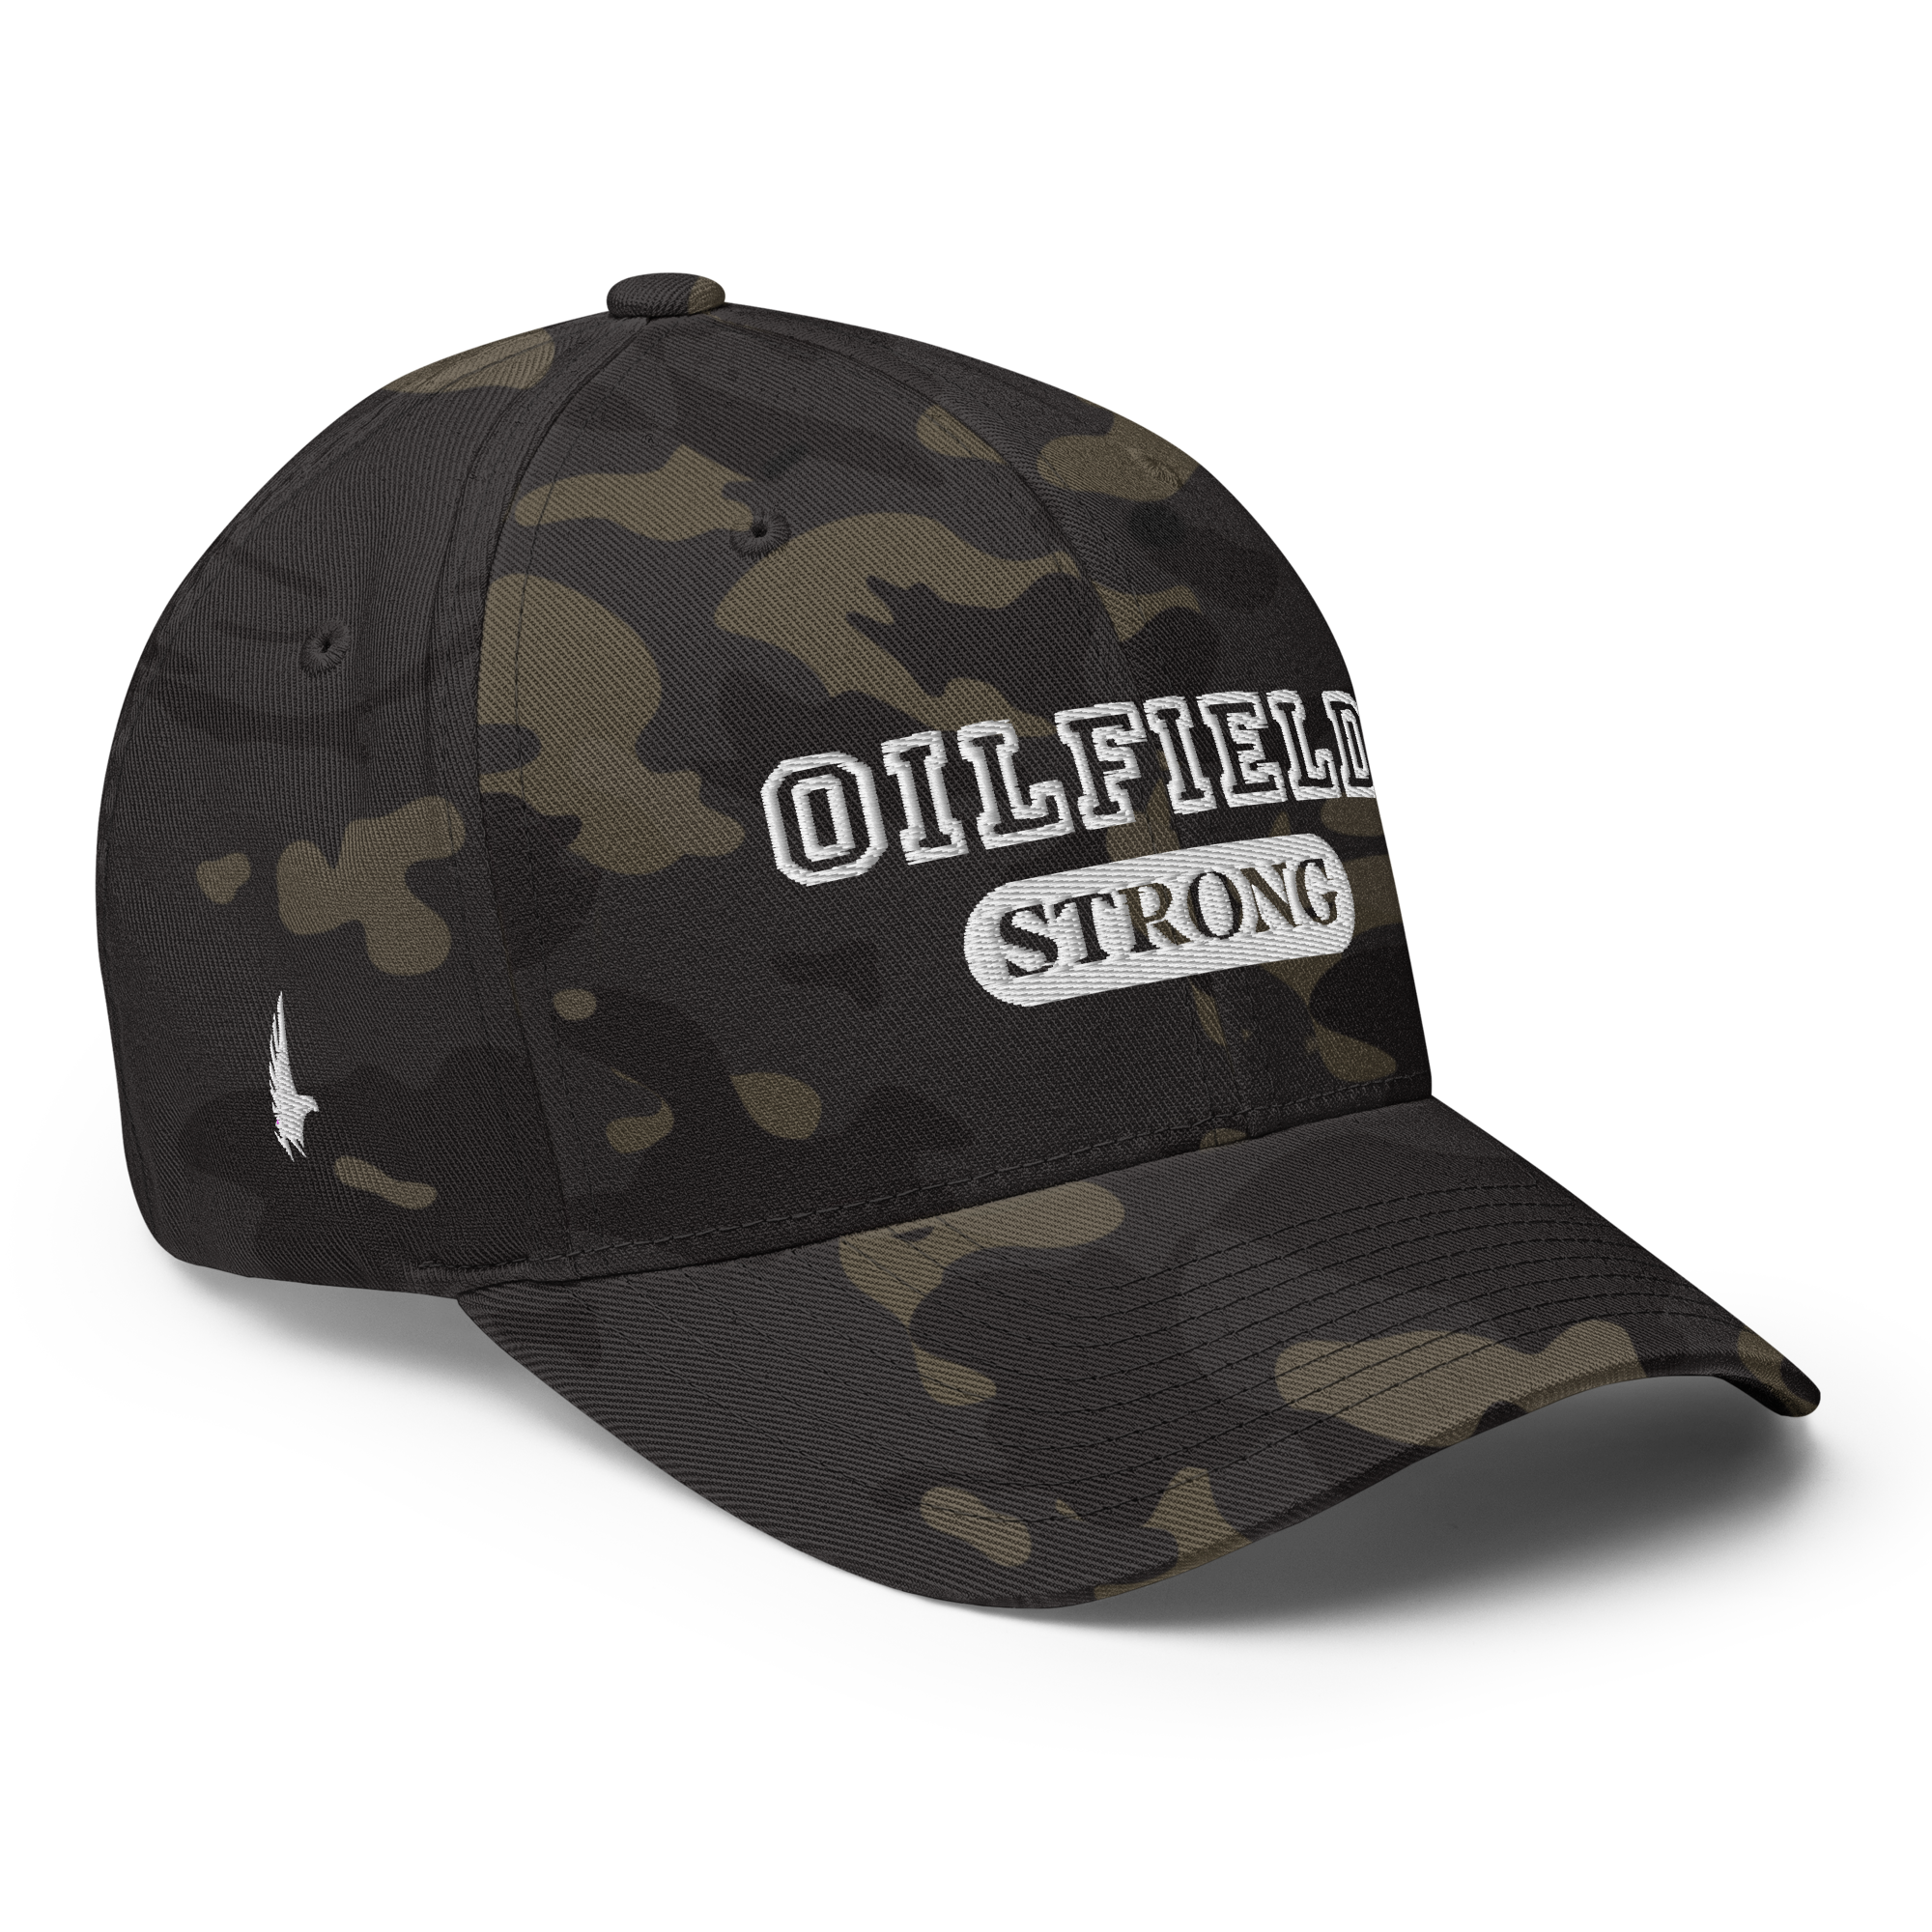 Oilfield Strong Fitted Hat Urban Camo - Loyalty Vibes